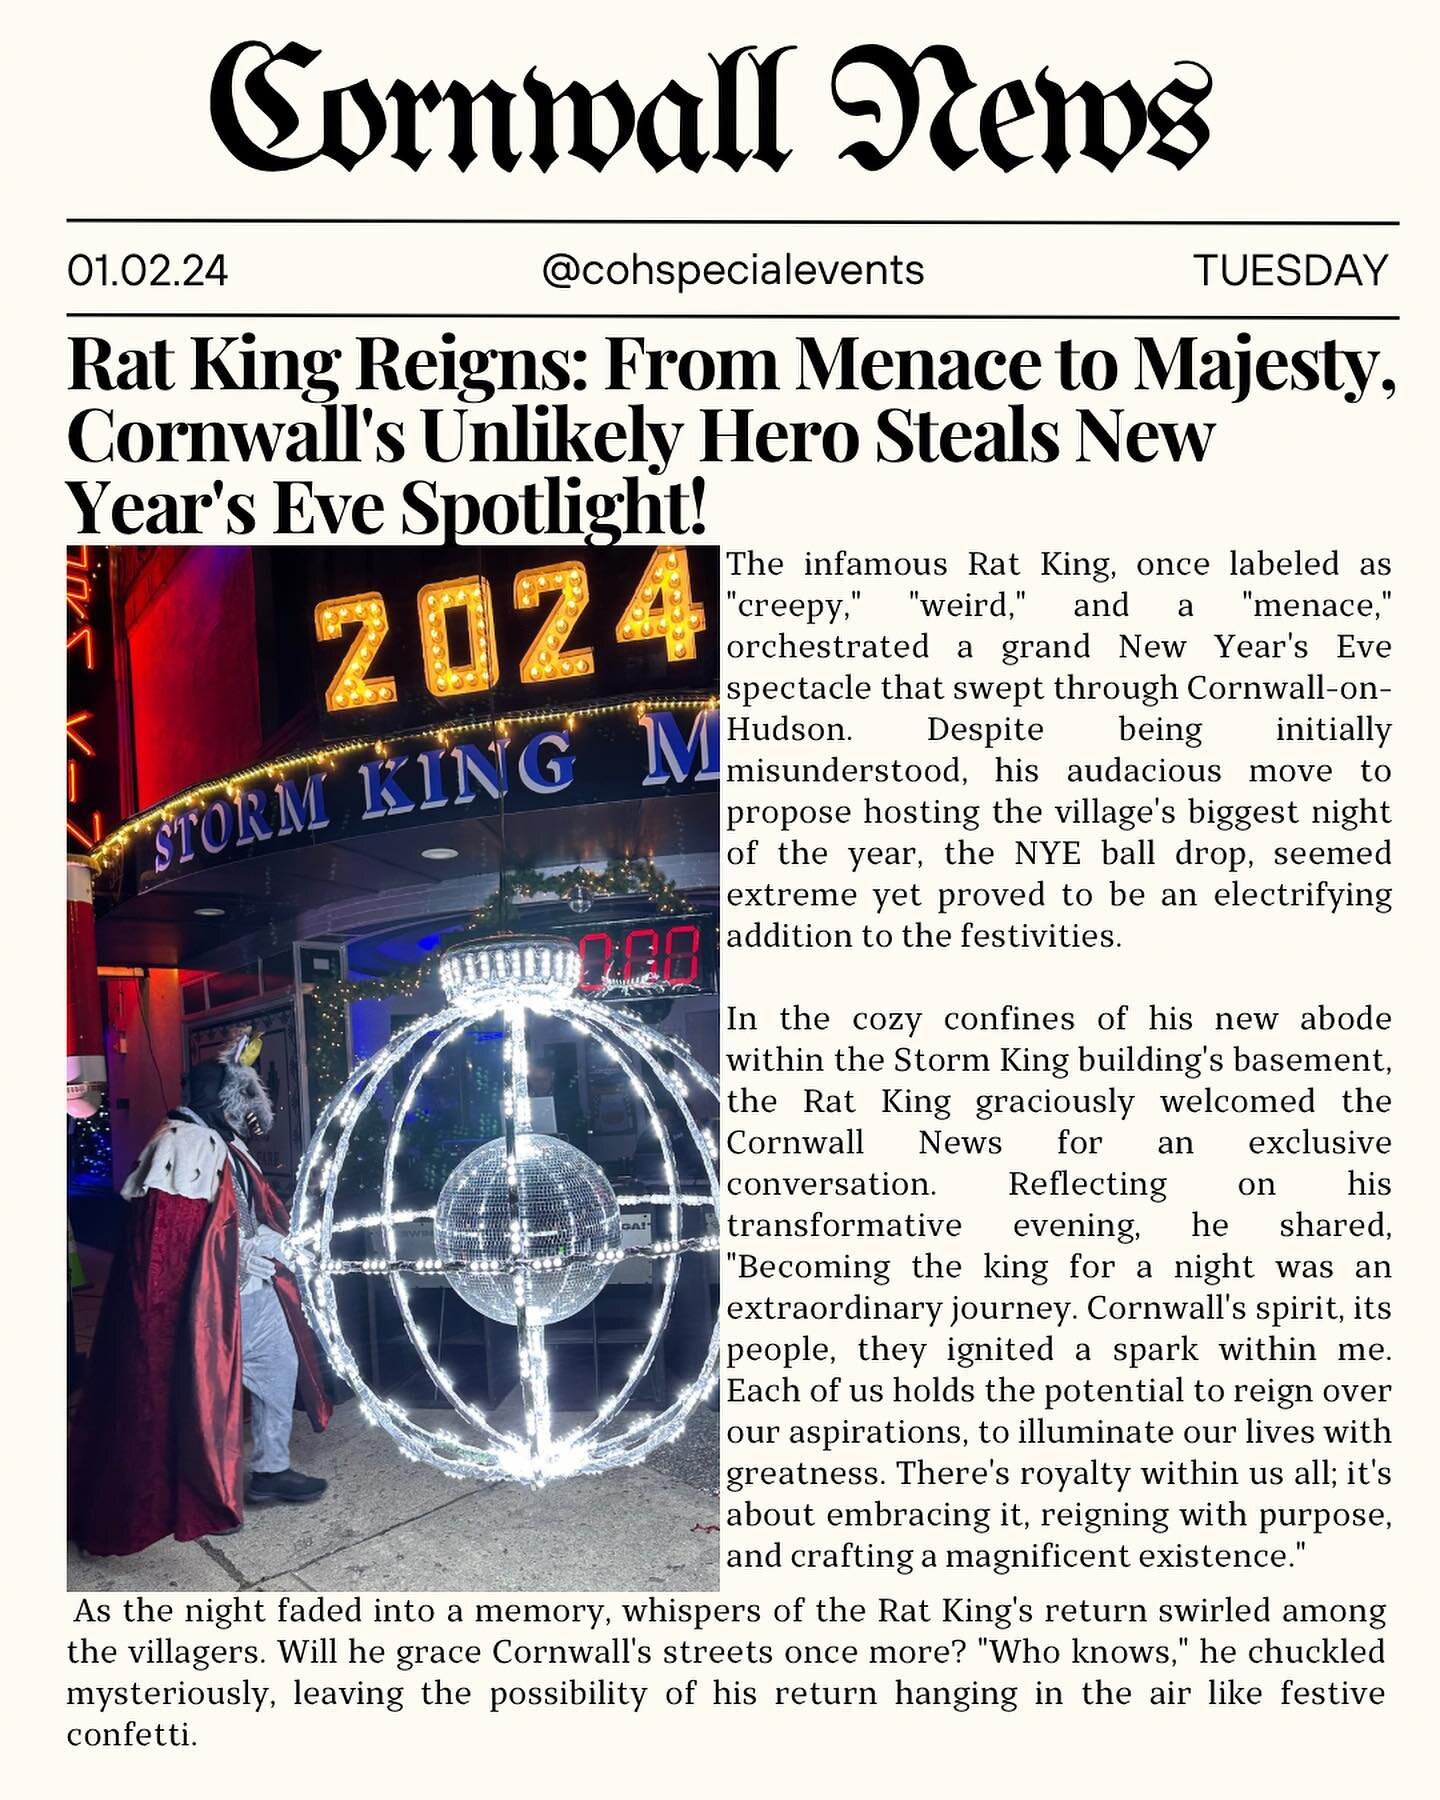 &ldquo;Rat King Reigns: From Menace to Majesty, Cornwall&rsquo;s Unlikely Hero Steals New Year&rsquo;s Eve Spotlight&rdquo;
The infamous Rat King, once labeled as &ldquo;creepy,&rdquo; &ldquo;weird,&rdquo; and a &ldquo;menace,&rdquo; orchestrated a g